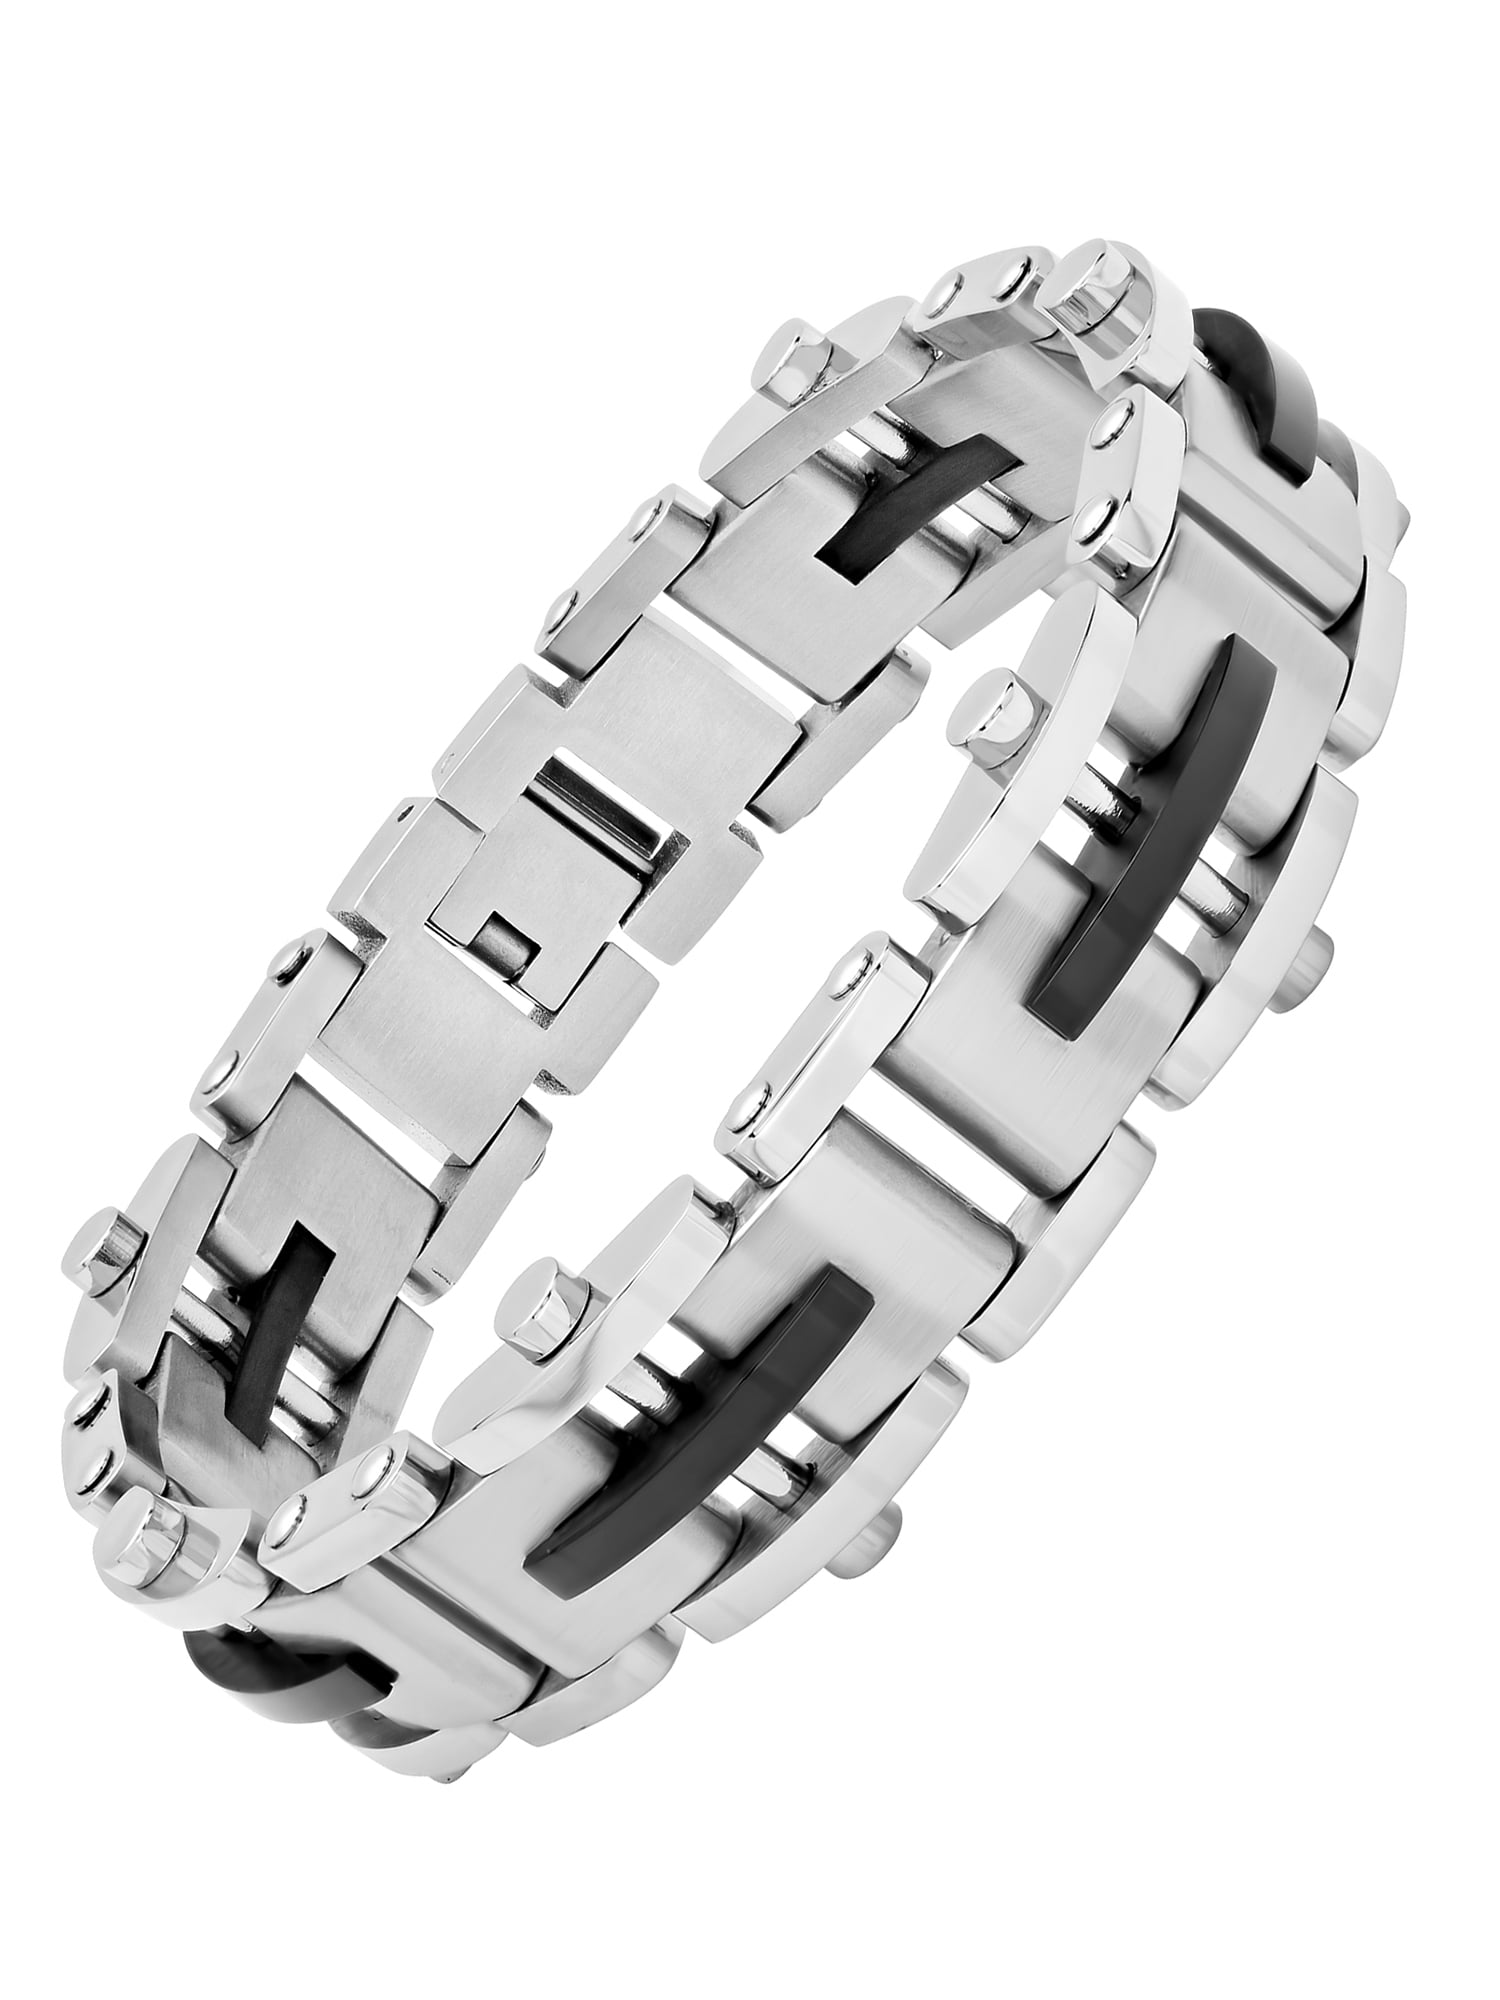 Goldia 8.25 Inch Stainless Steel Brushed and Polished Bracelet